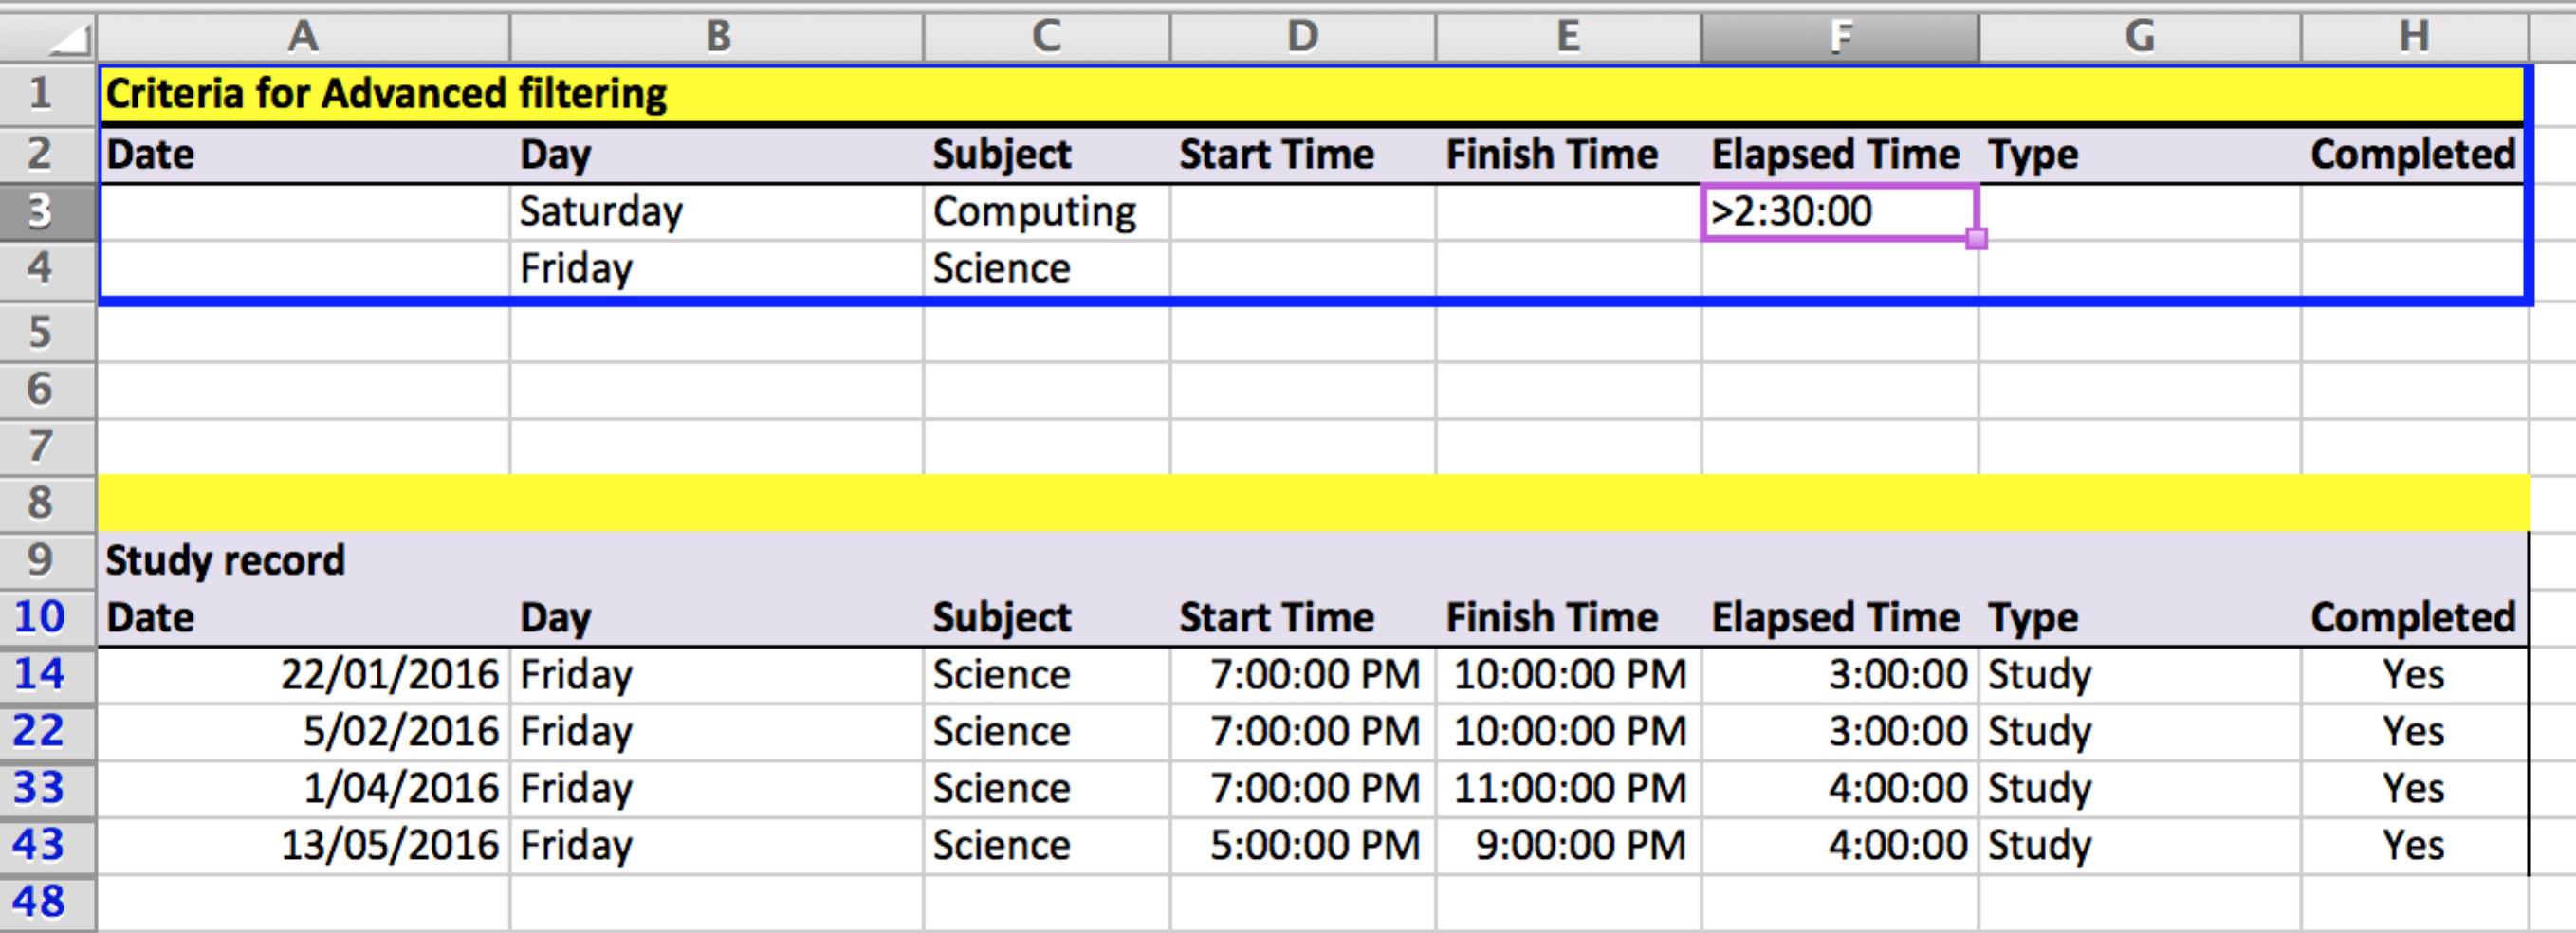 Image displays the excel table with data reflecting the first student's activity as an extension to determine how many occasions this student studied Computing on a Saturday or Science on a Friday for more than 2.5 hours.